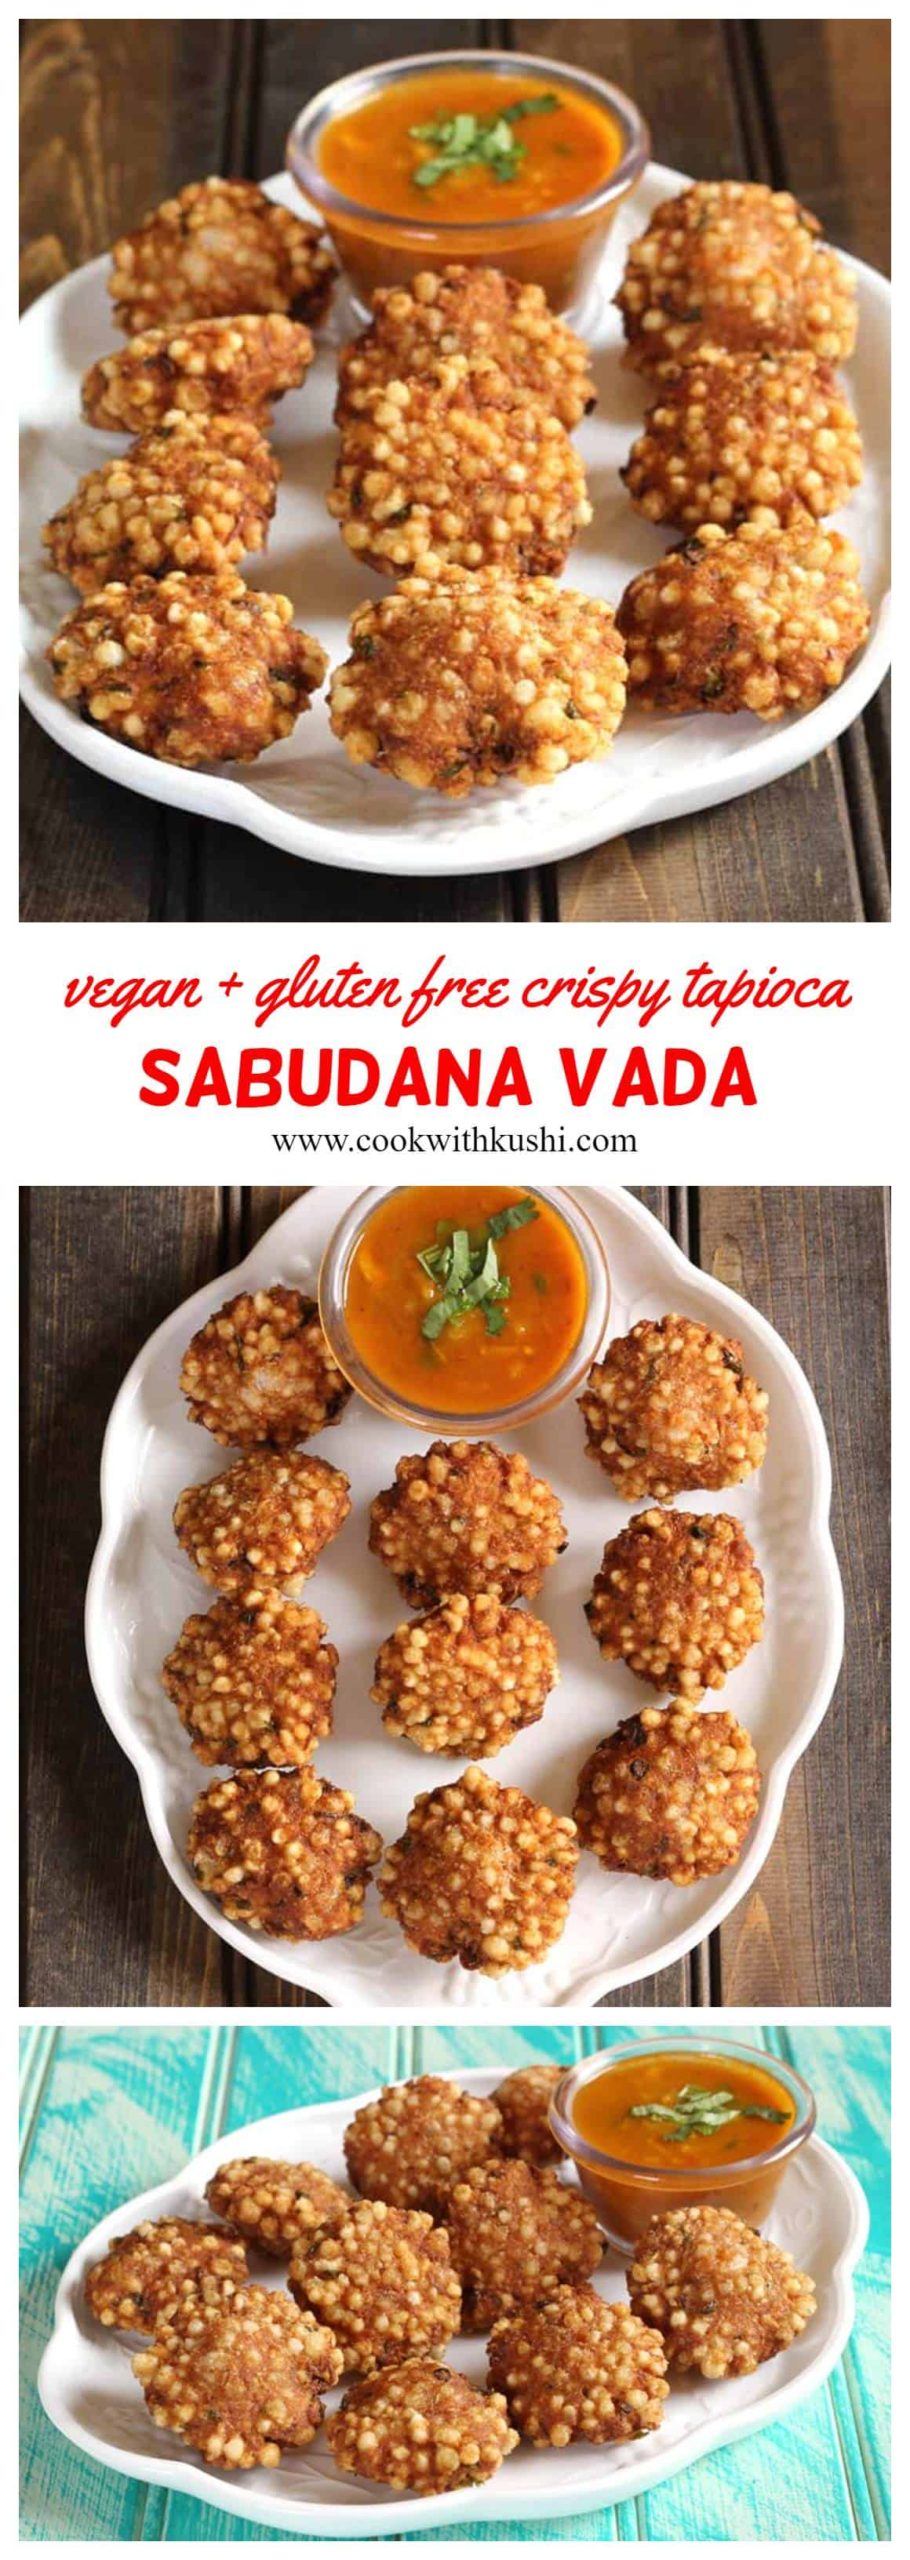 Sabudana Vada or Crispy tapioca or Sabu Vada is a irresistibly delicious deep fried Indian snack or finger food that is crispy and crunchy on the outside with chewy texture inside and will simply melt in your mouth. #sabudanavada #sabudanarecipes #sagorecipes #tapiocapearls #veganglutenfreesnacks #indianrecipes #fastingrecipes #vratrecipes #upvasrecipes 